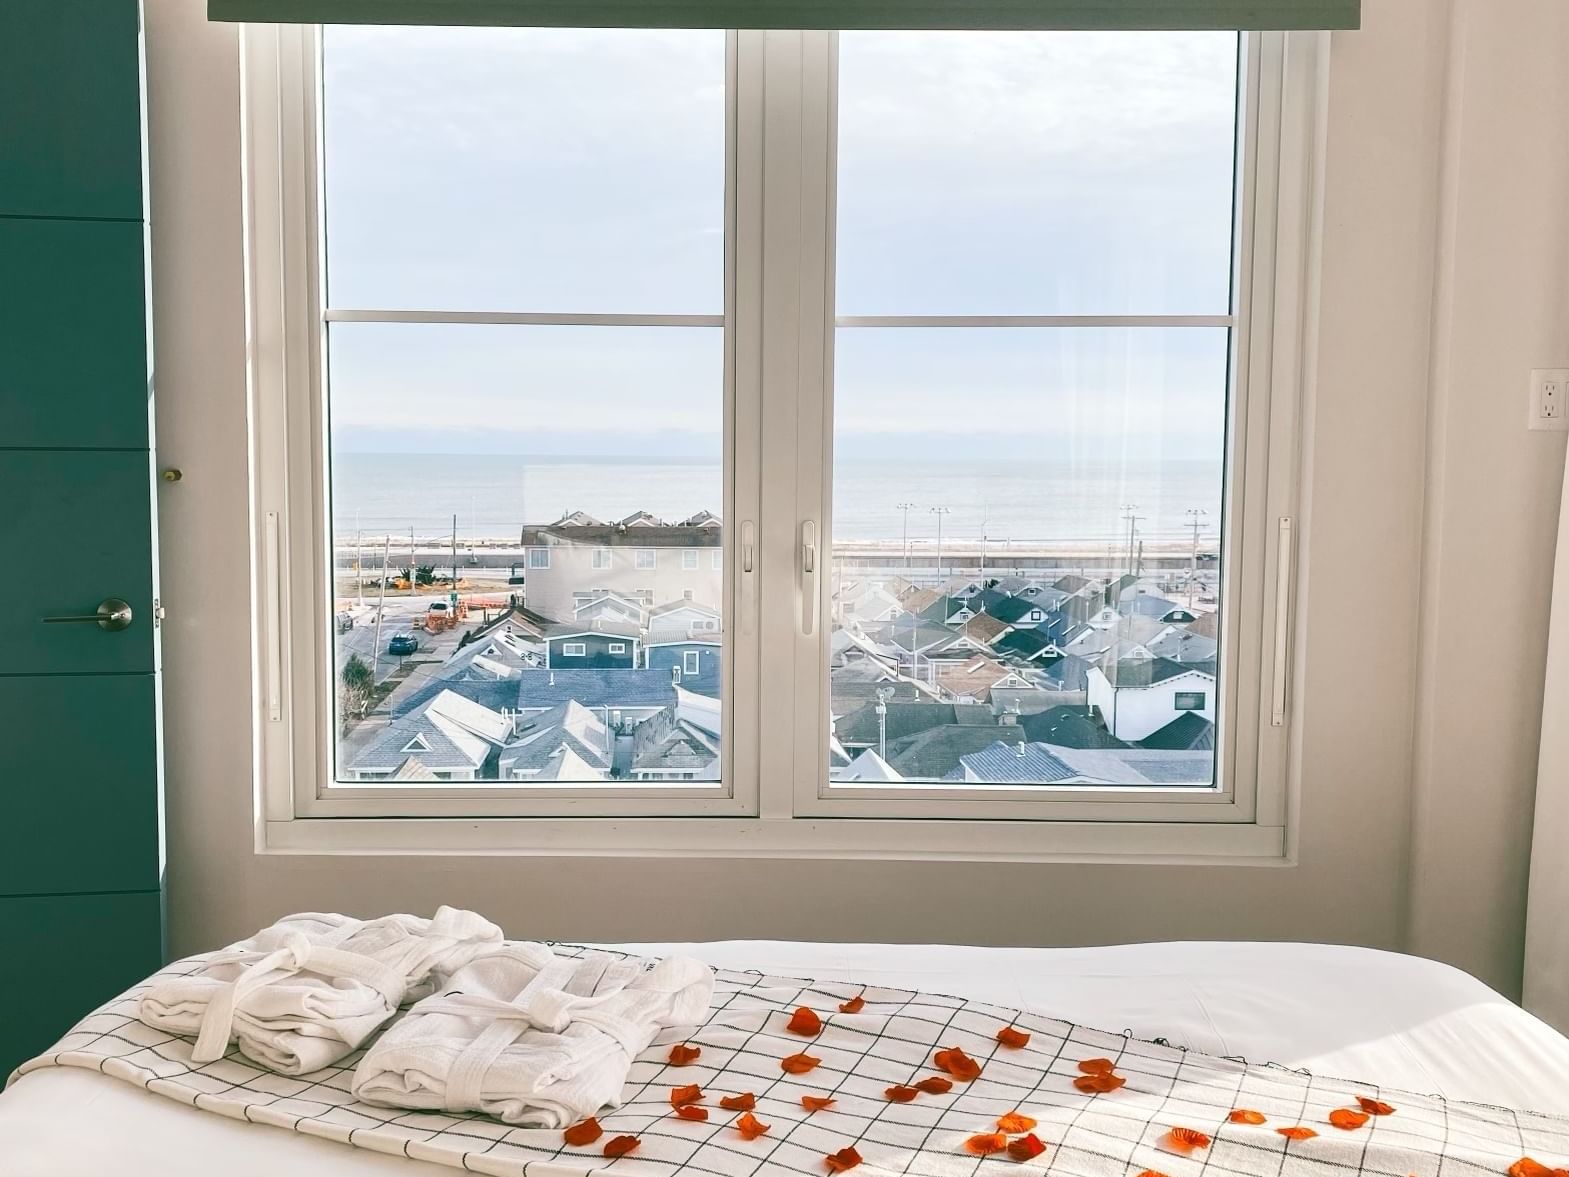 Bed with folded robes & petals near window, The Rockaway Hotel